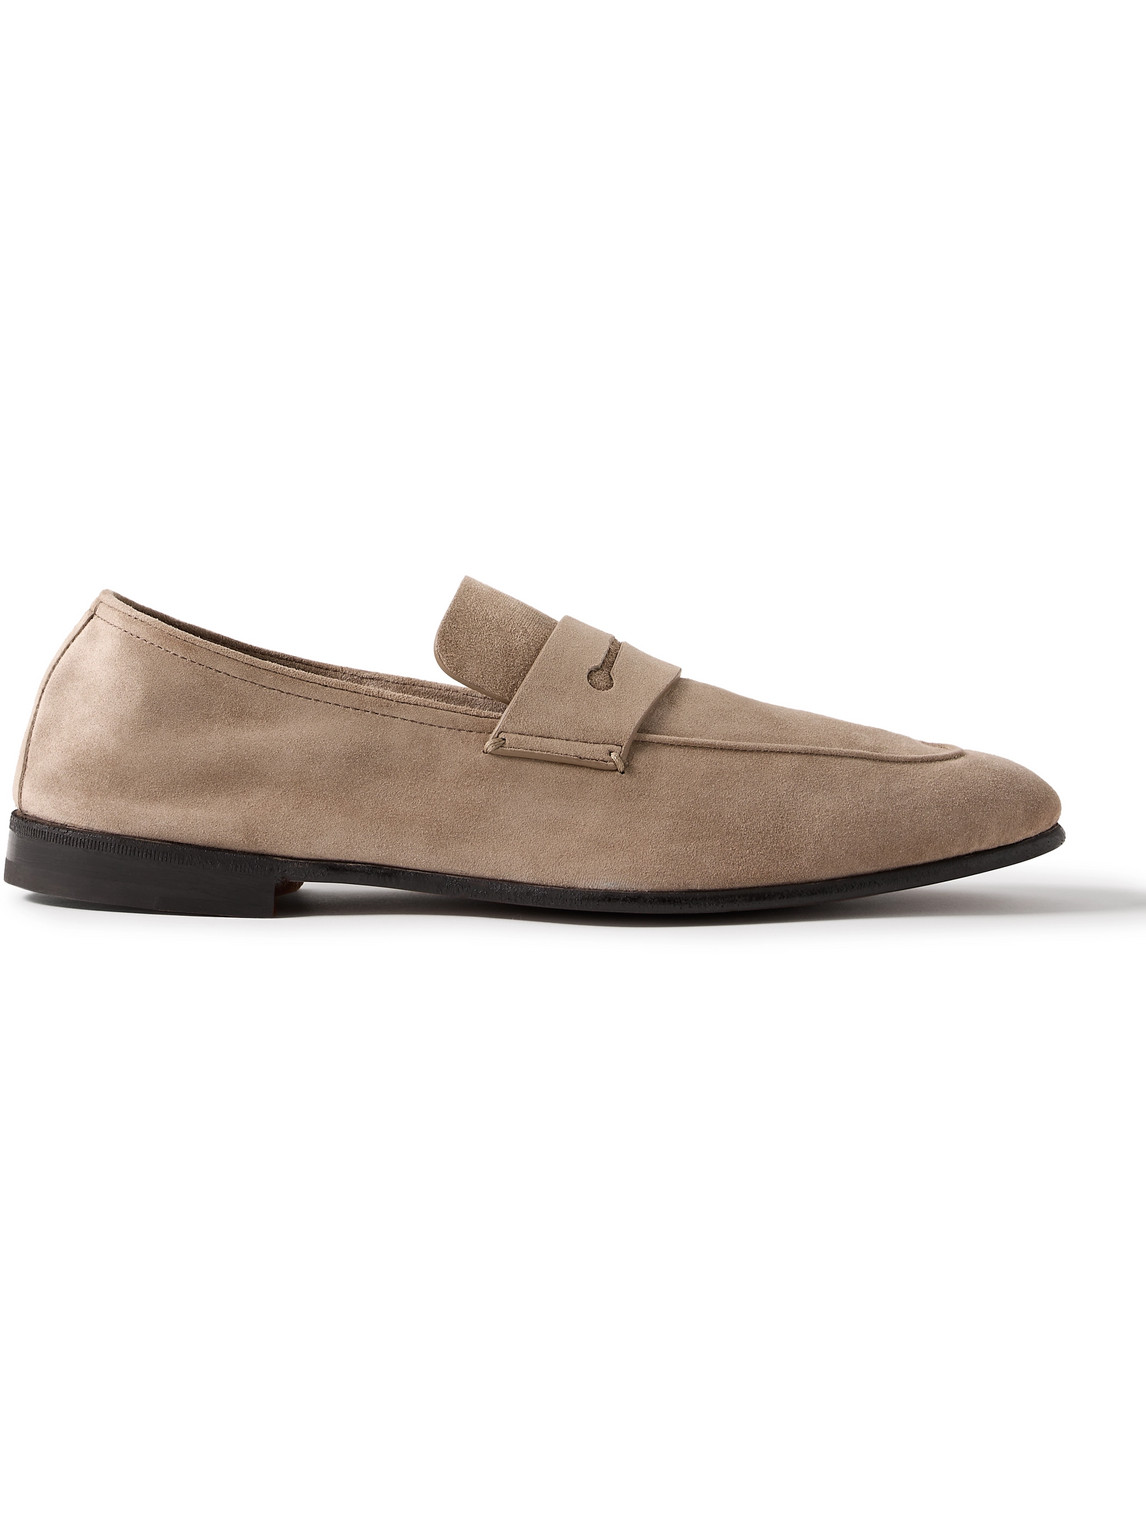 L'Asola Suede Penny Loafers